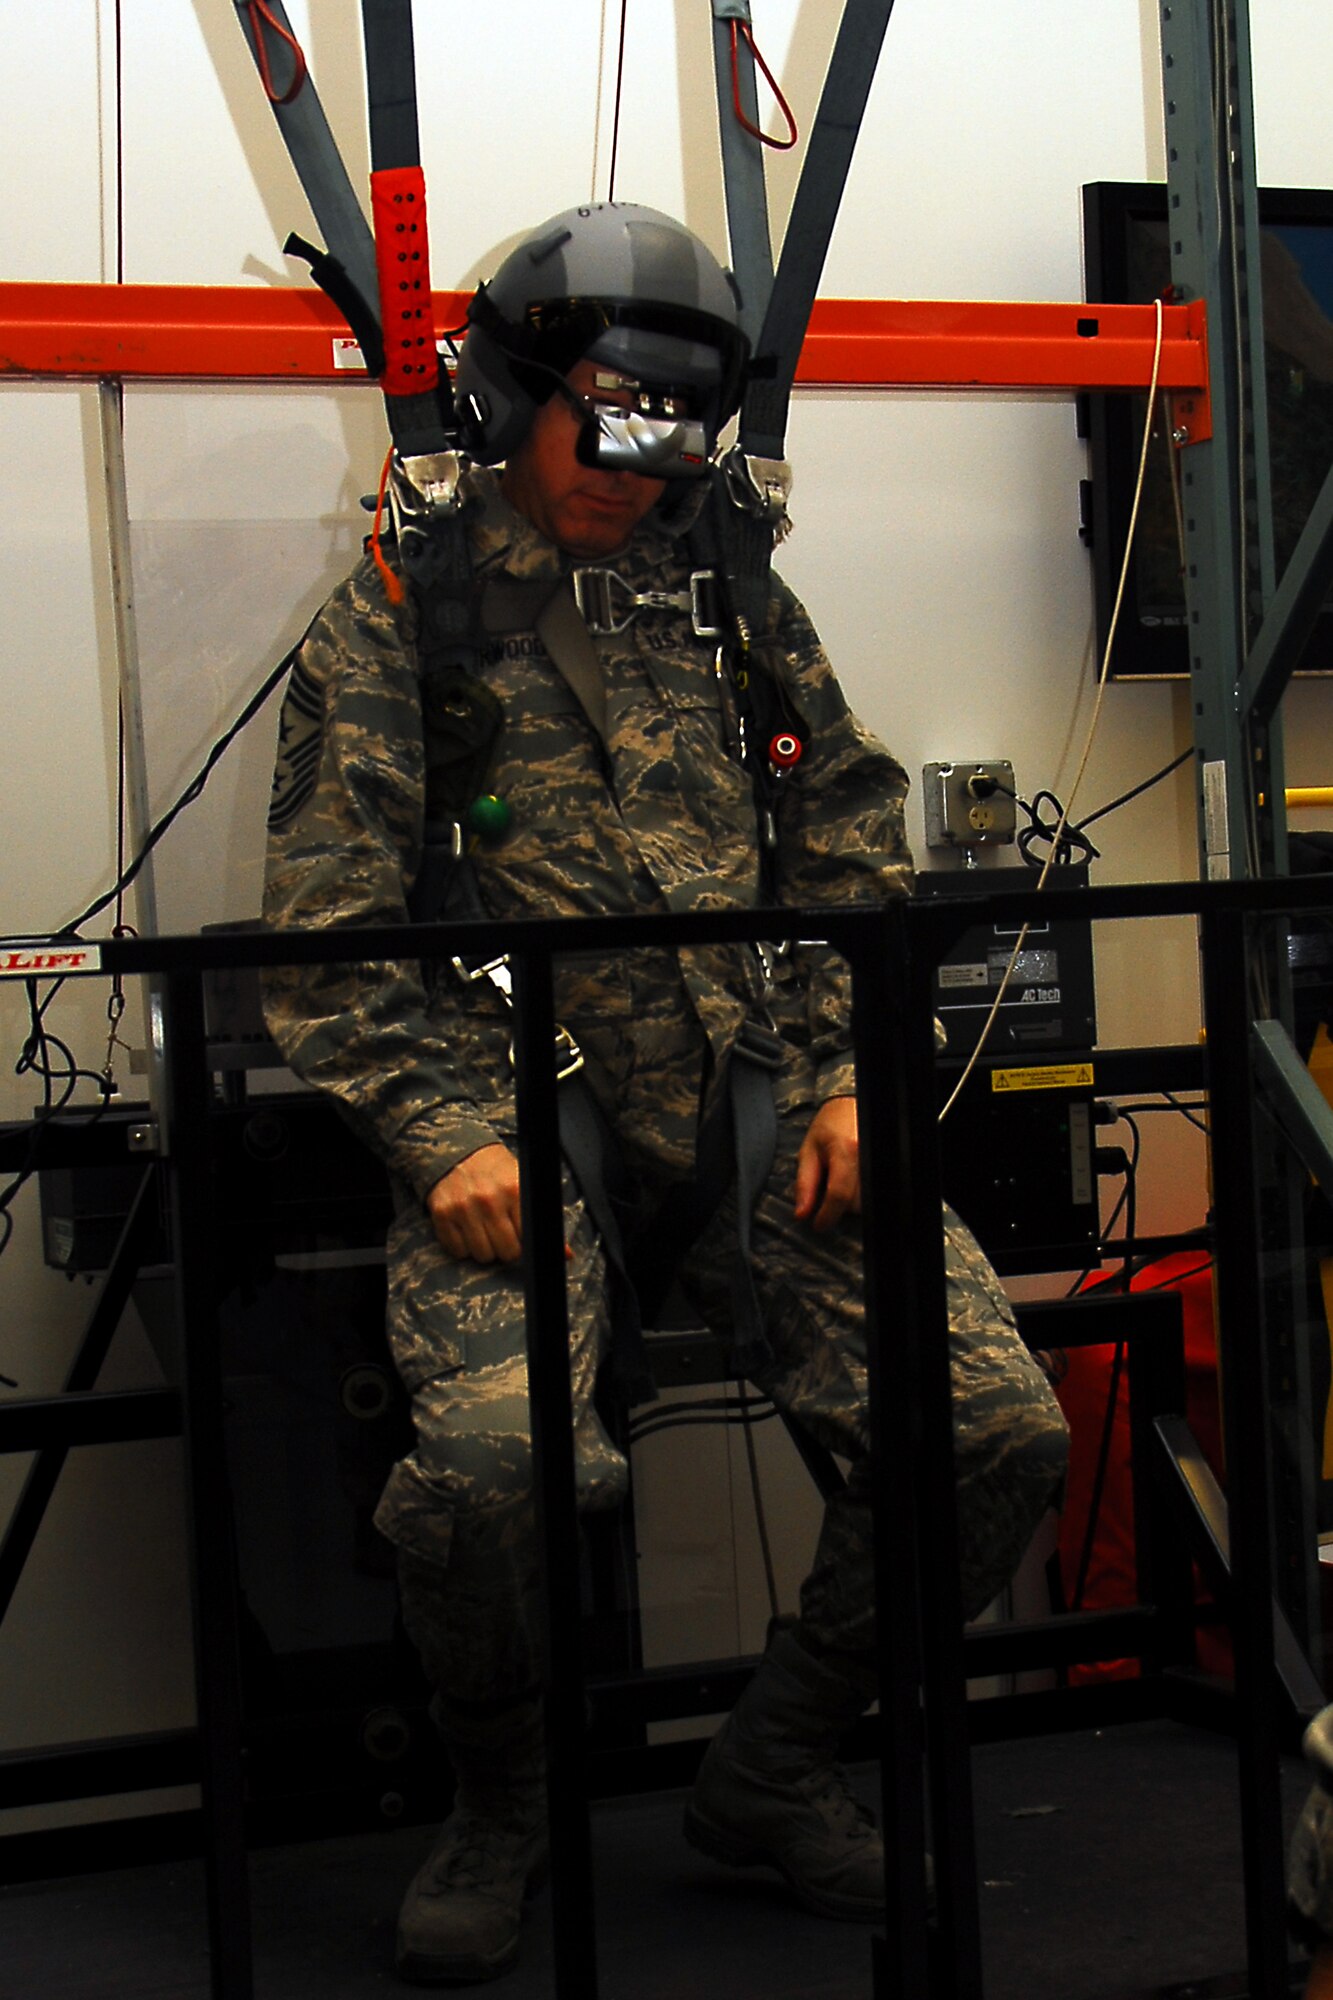 Chief Master Sergeant Steven Larwood, 22nd Air Force command cheif, sits in the horness of a parachute simulator in the 403rd Aircrew Flight Equipment shop. Master Sergeant Ray Reynolds, 403rd AFE supervisor, instructs the chief on how to operate the simulator when he stop to visit the shop as part his visit to the 403rd Wing. (U.S. Air Force Photo by Senior Airman Tabitha Dupas)